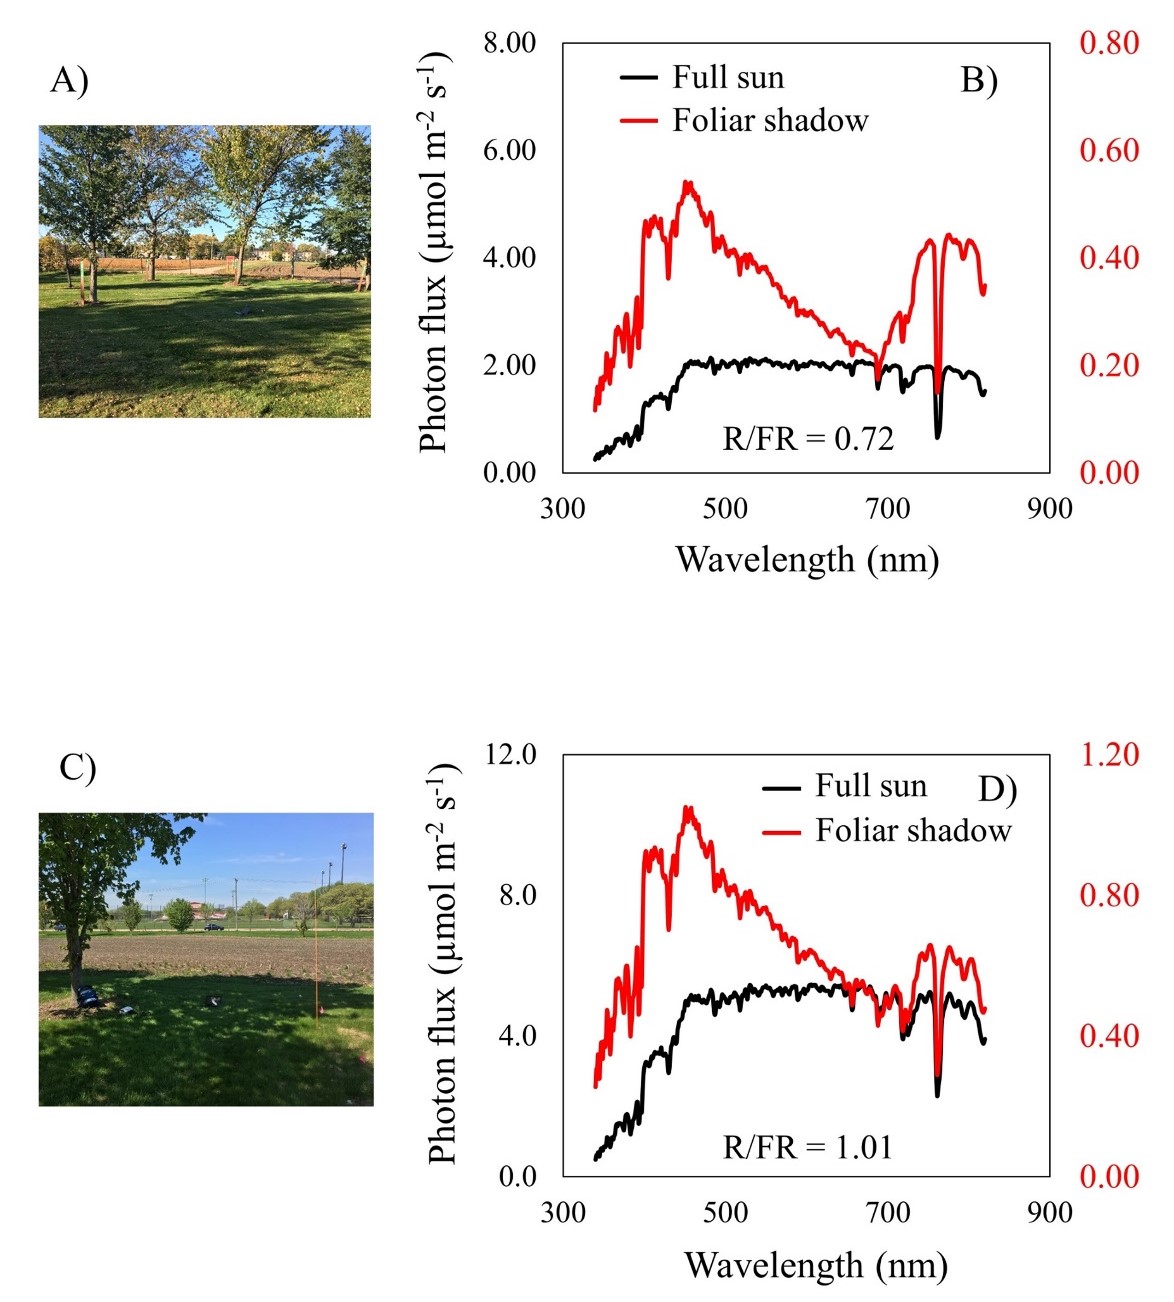 two graphs of wavelength vs photon flux alongside photos of turfgrass shaded in the field